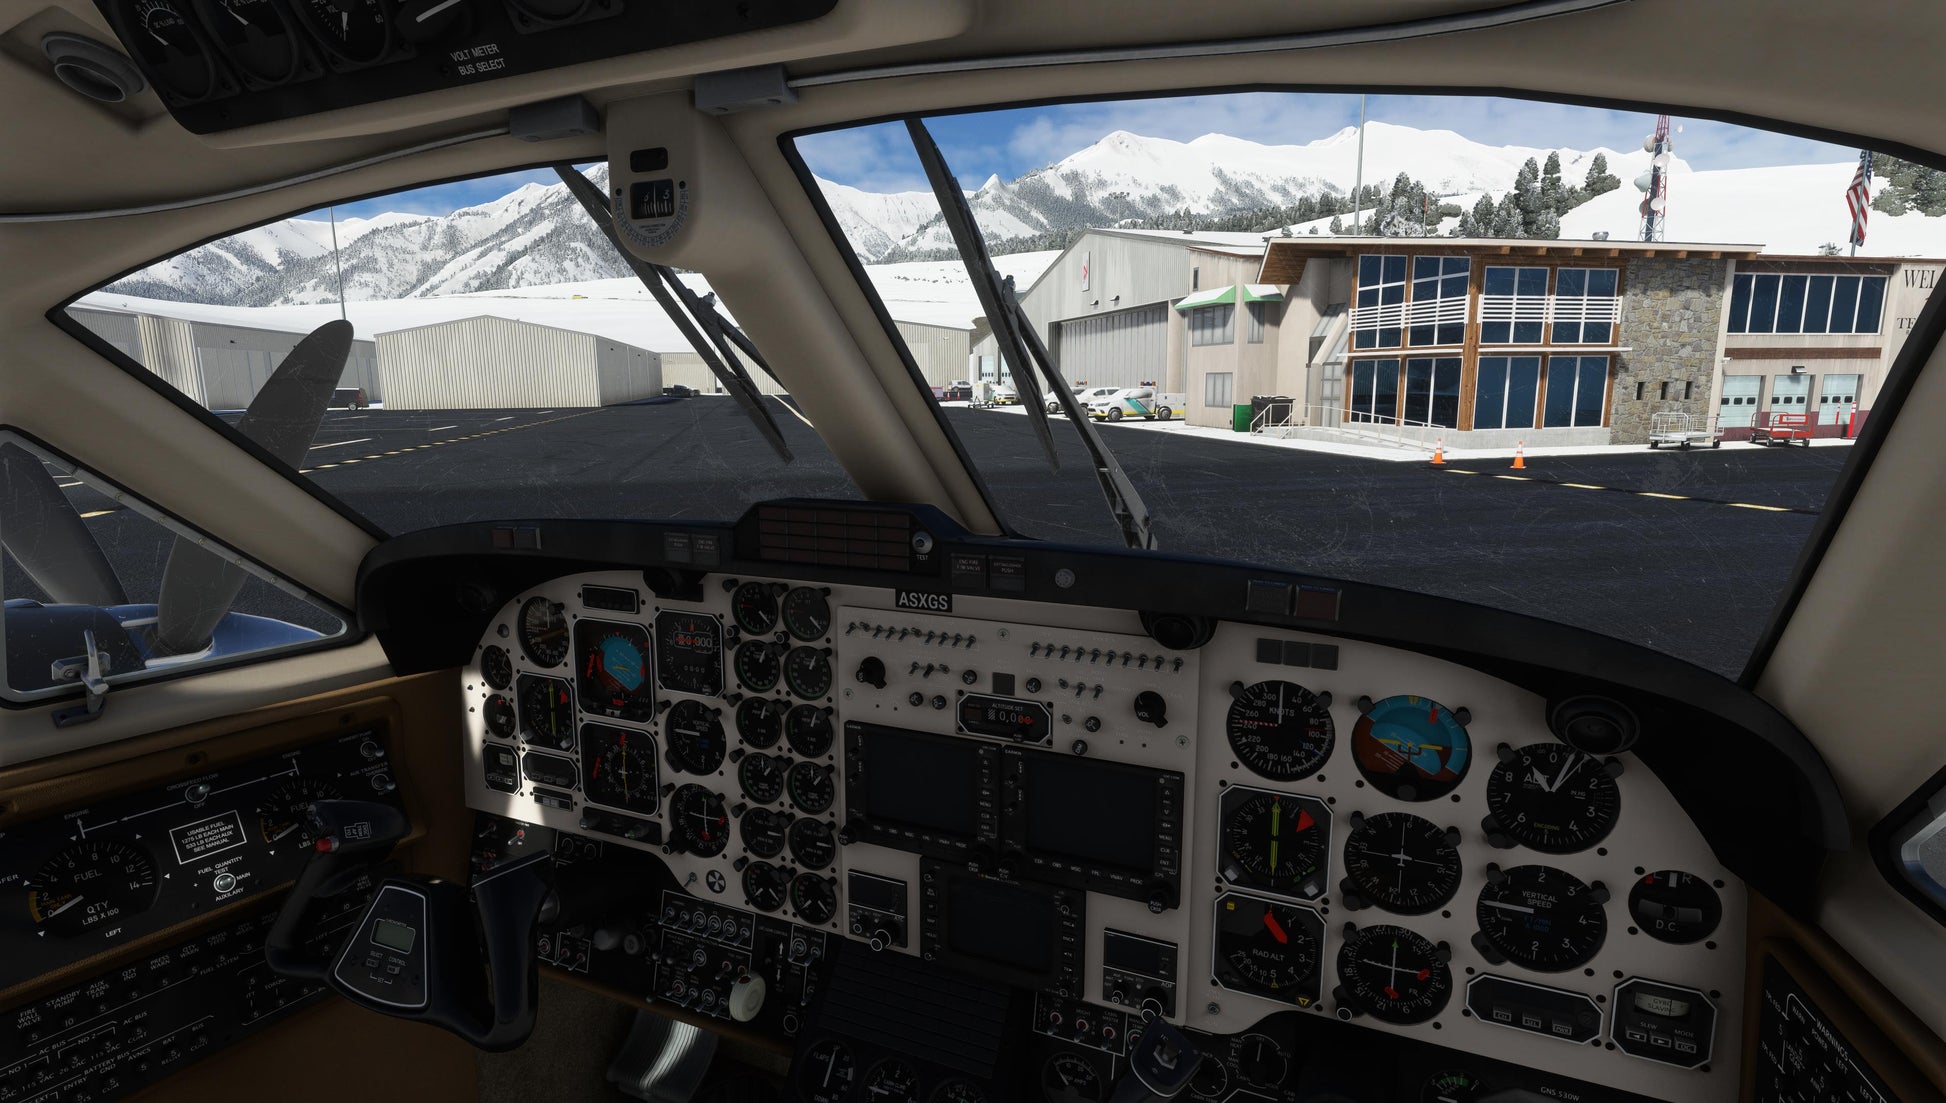 Microsoft Flight Simulator: Steam users want refund time extension - PC -  News 